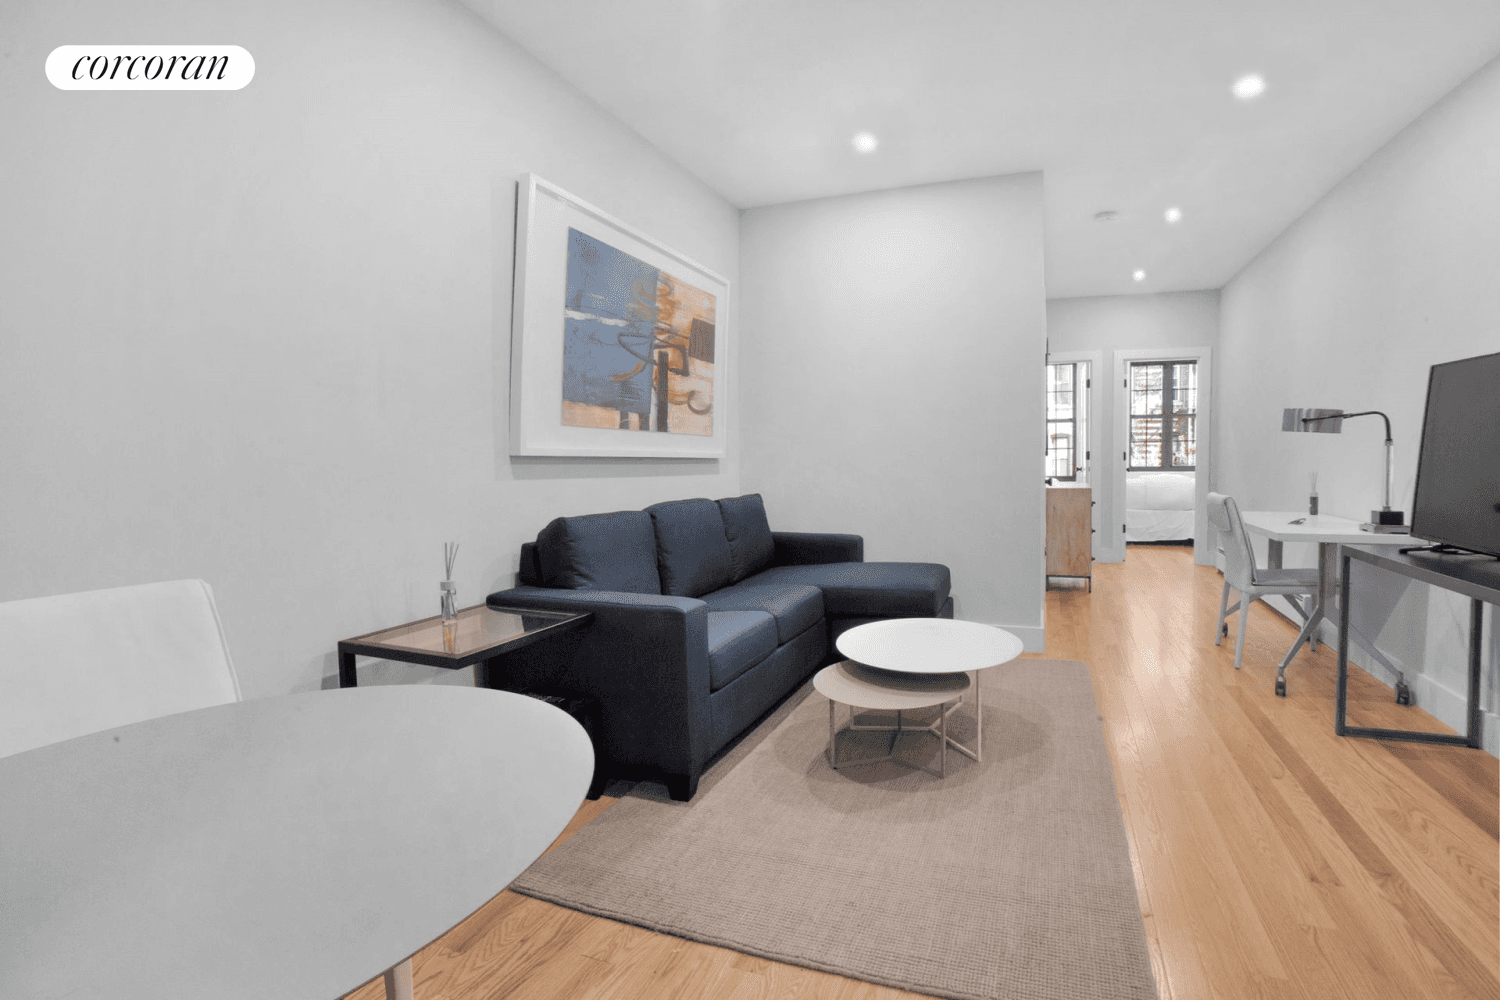 4 bedroom, 2 bathroom in a newly and fully renovated boutique luxury building in the heart of the Upper East Side !